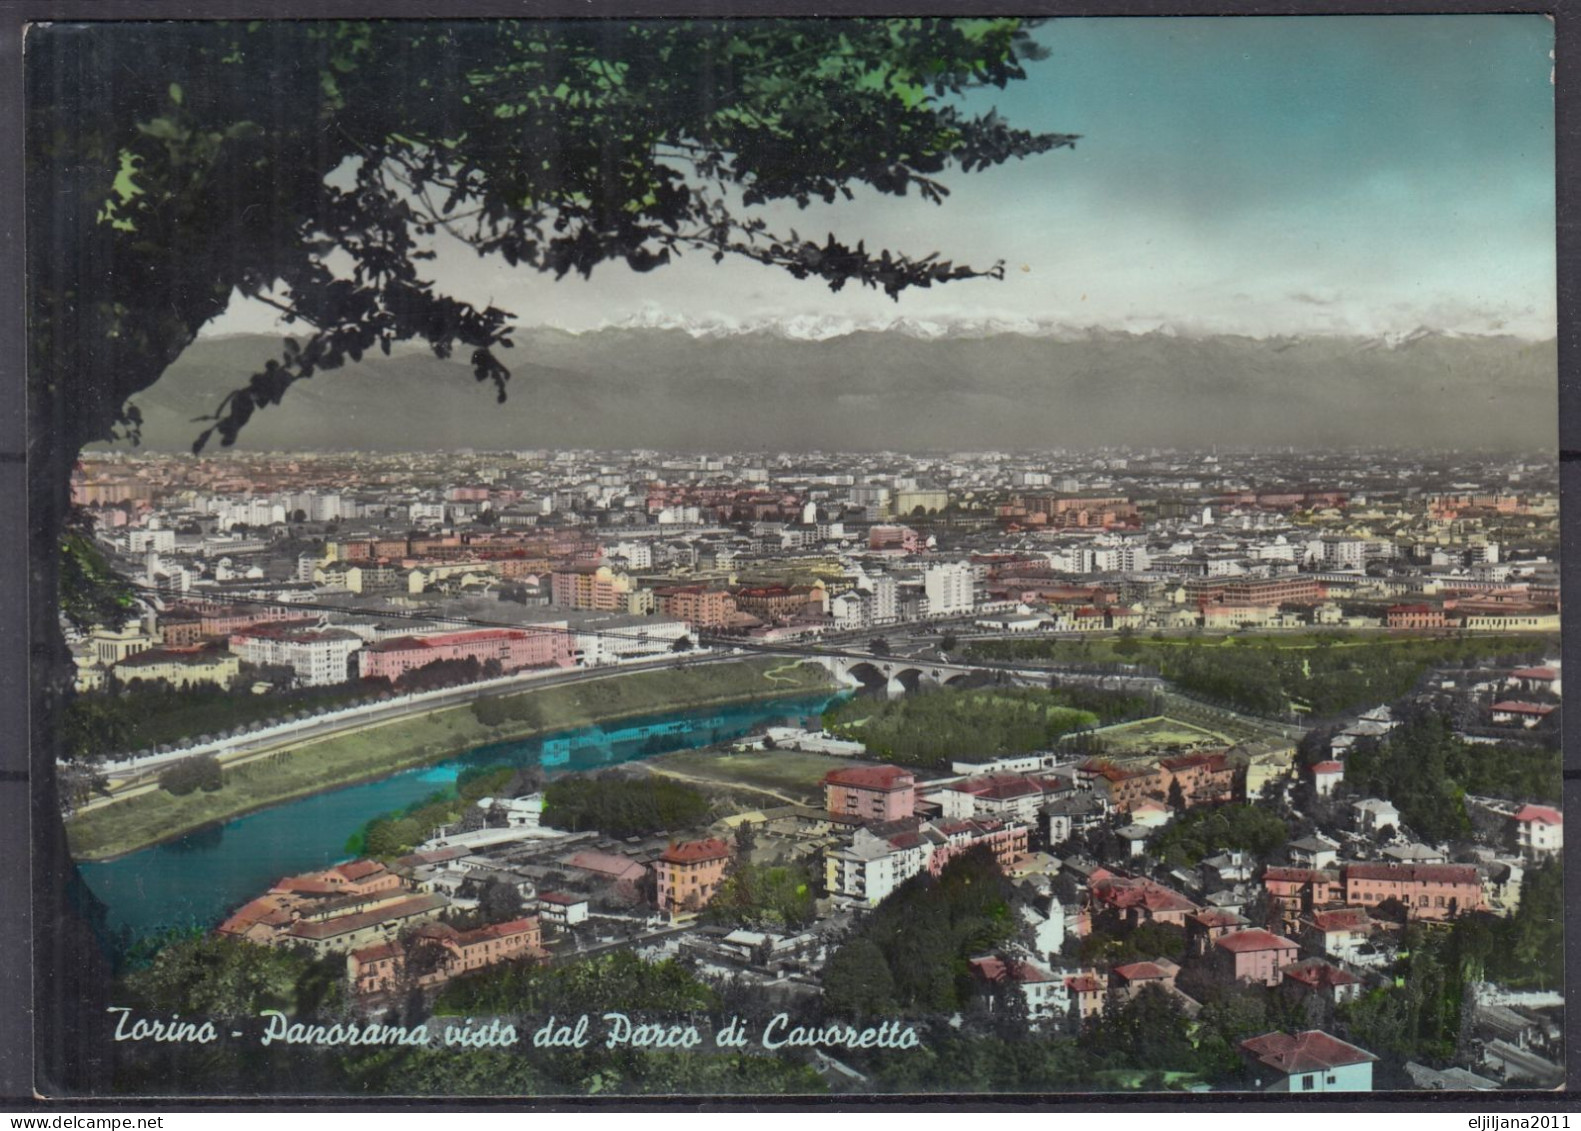 Action !! SALE !! 50 % OFF !! ⁕ Italy 1960 TORINO - TURIN Panorama / Viev From Cavoretto Park ⁕ Postcard - Multi-vues, Vues Panoramiques